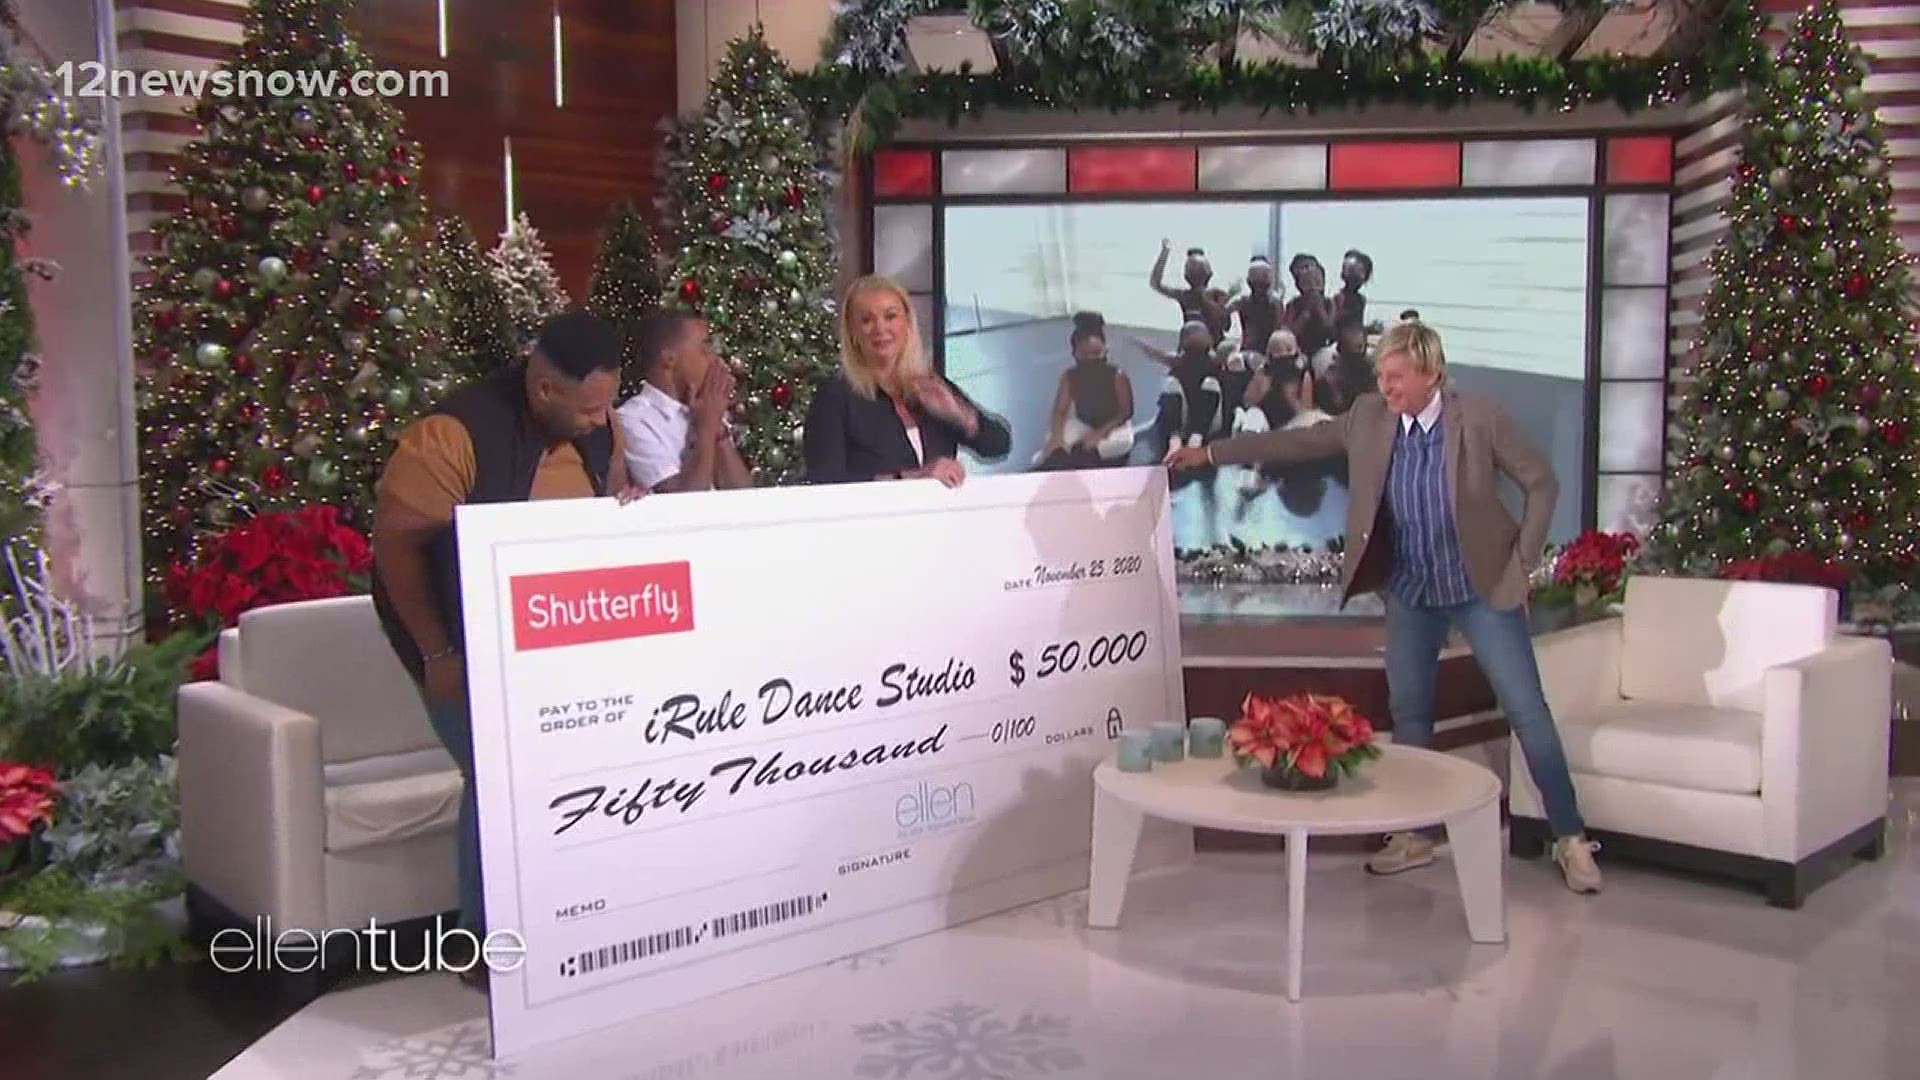 iRule Dance Studio received a $50,000 check from Ellen DeGeneres and Shutterfly